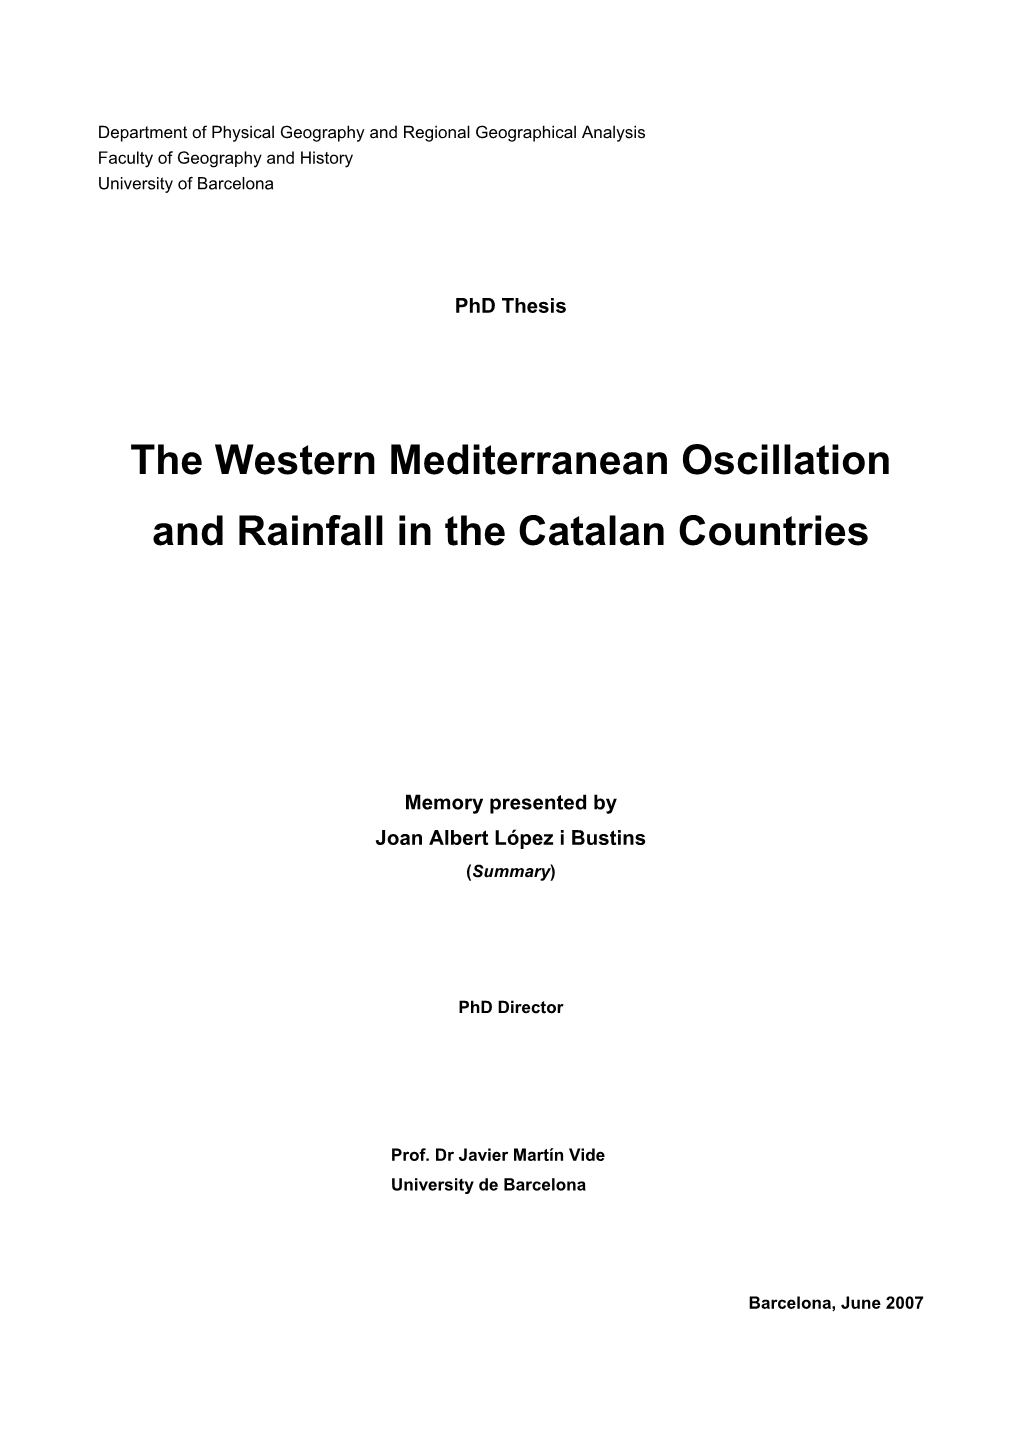 The Western Mediterranean Oscillation and Rainfall in the Catalan Countries